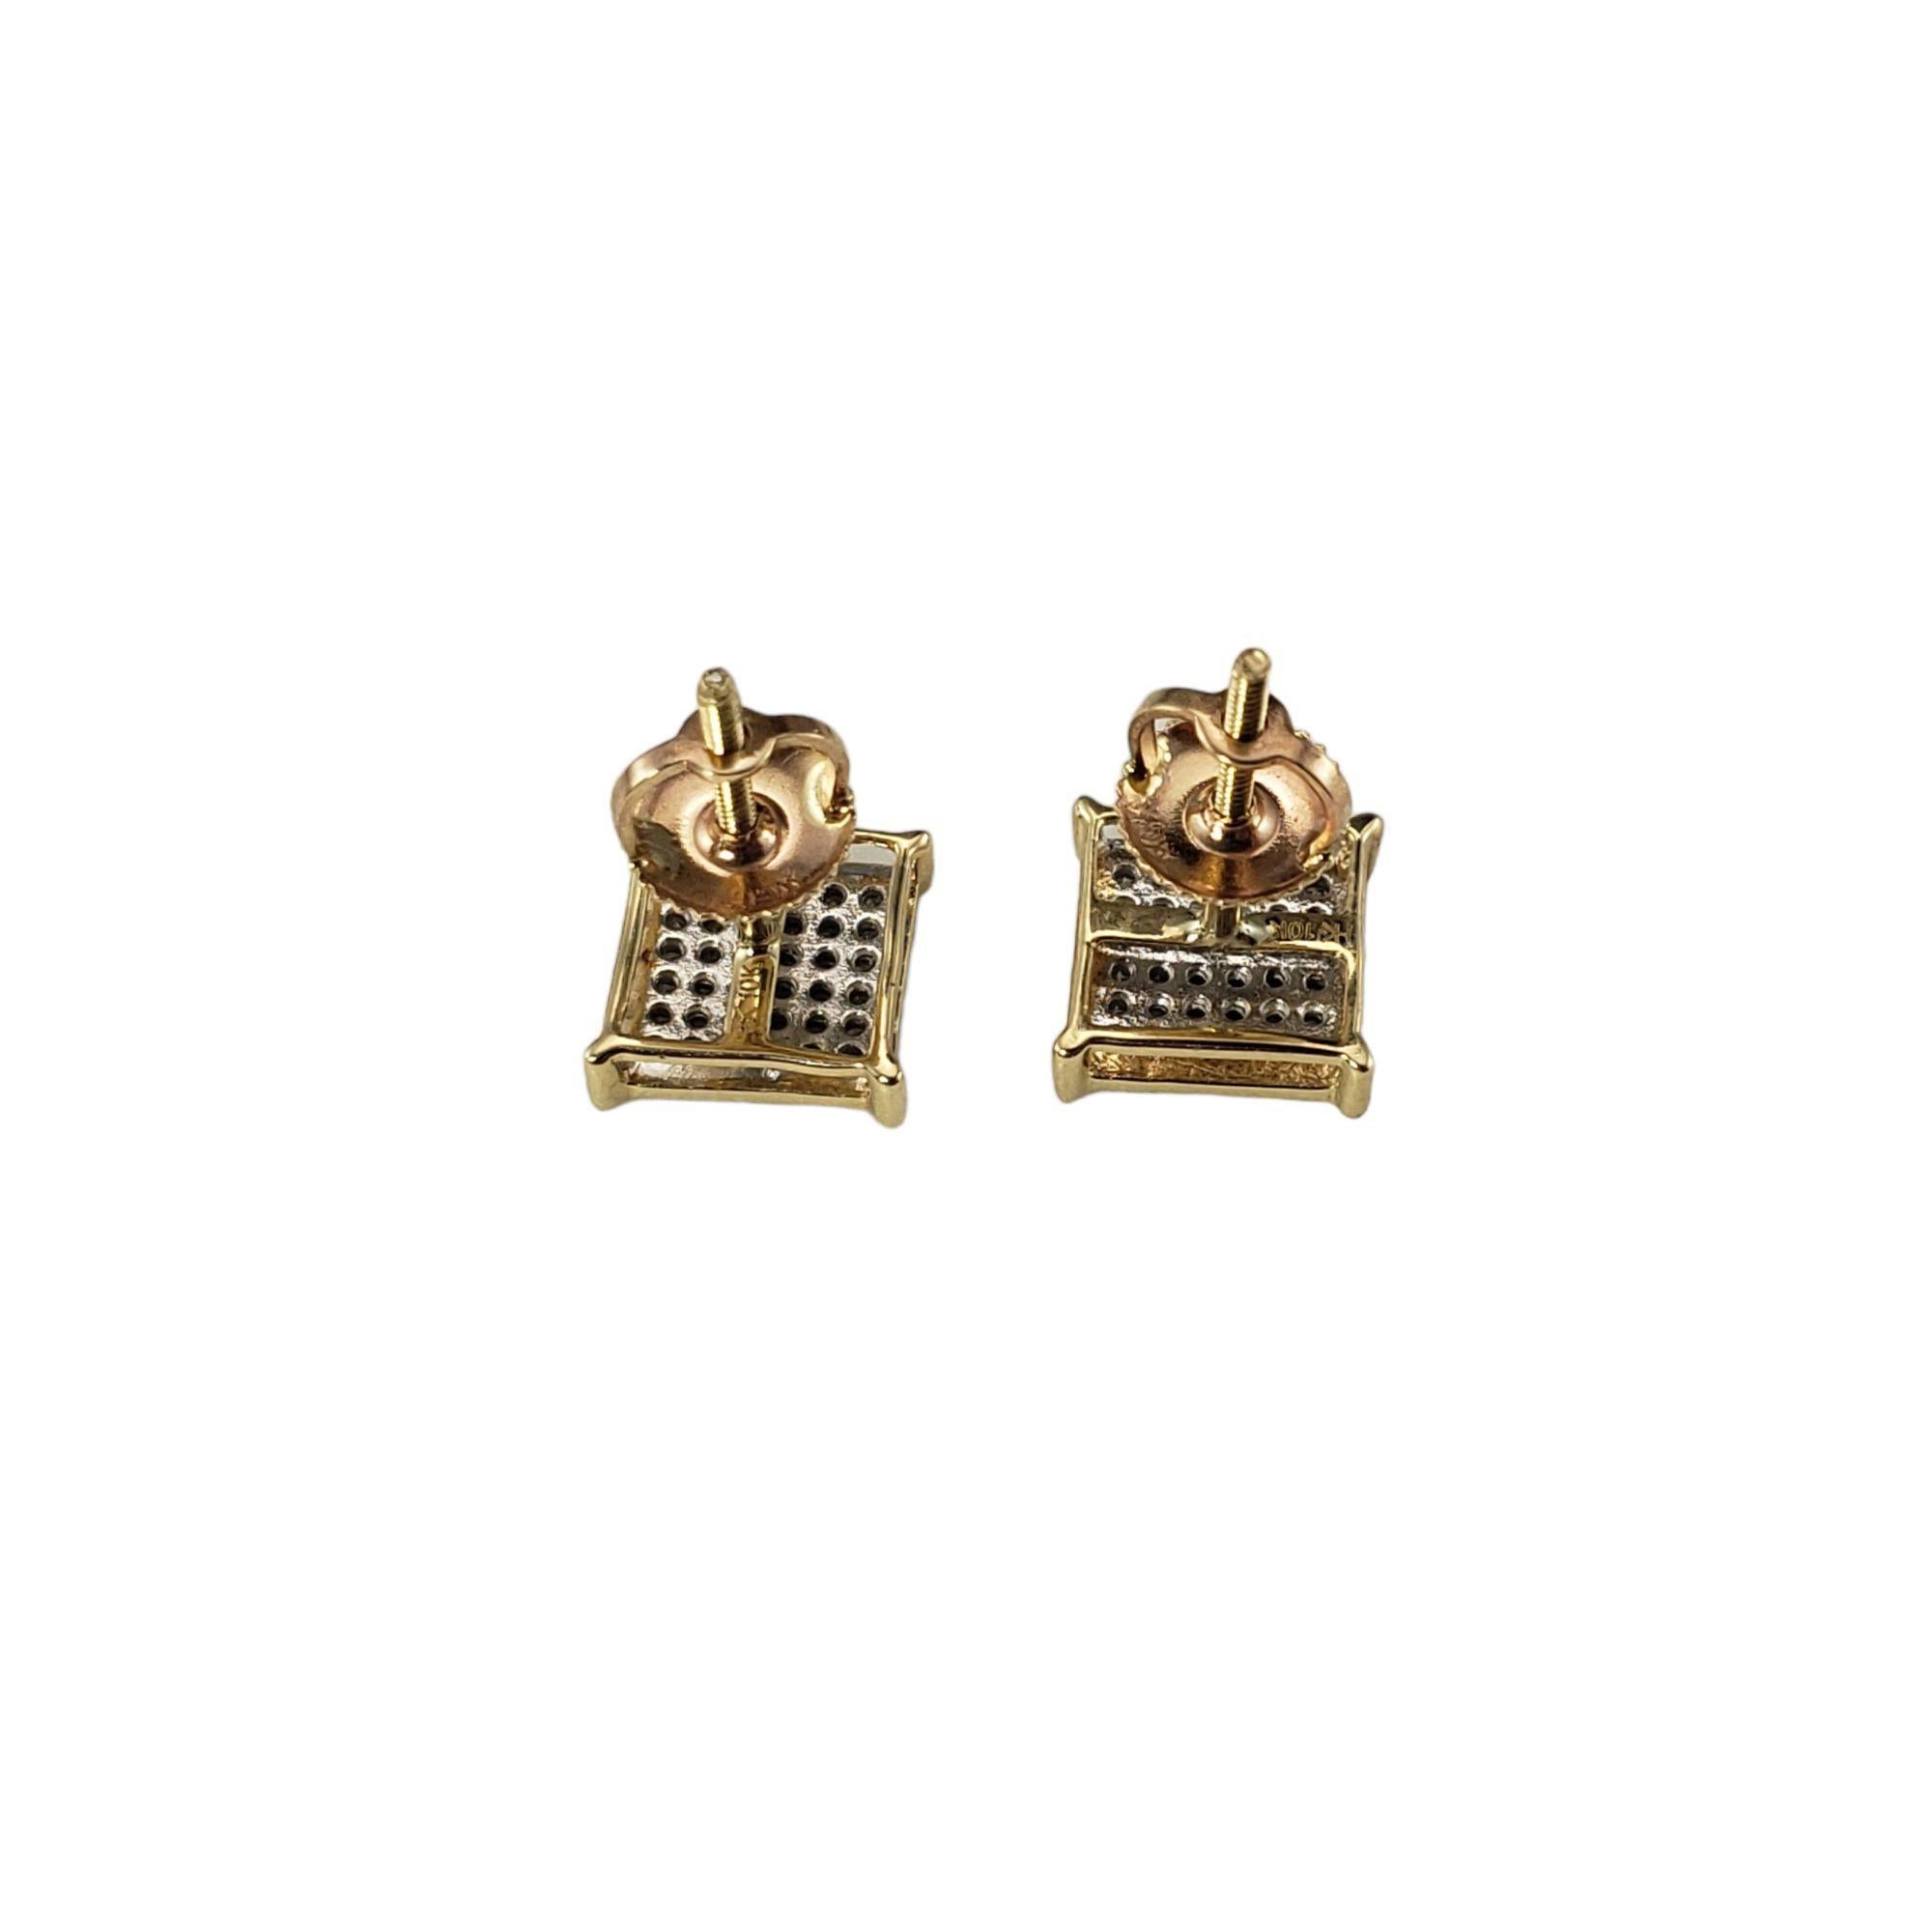 10 Karat Yellow Gold and Diamond Earrings #15275 In Good Condition For Sale In Washington Depot, CT